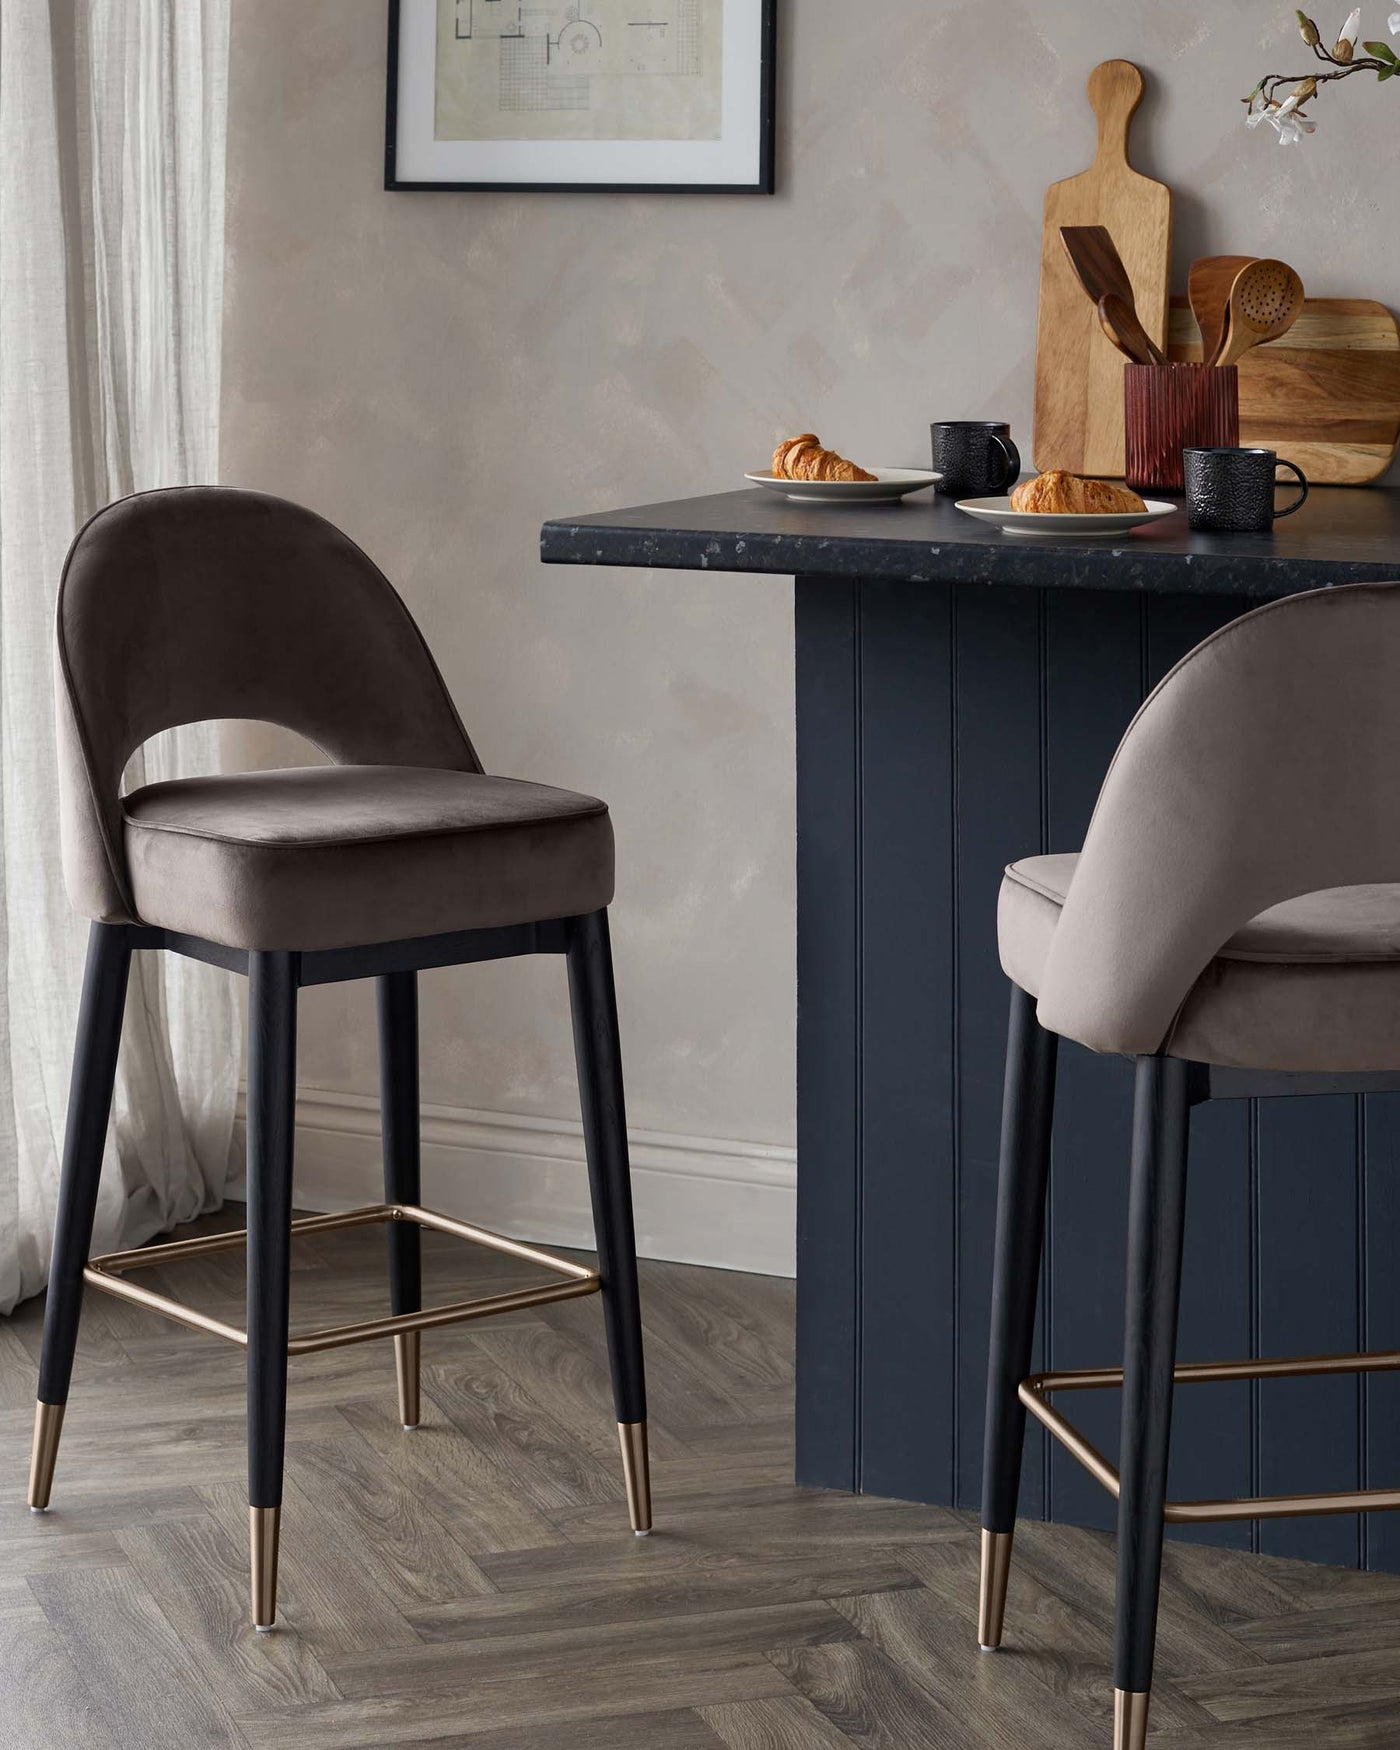 Two elegant, modern bar chairs with dark brown upholstery and black frames featuring gold-coloured accents on the leg tips and footrests. The chairs are positioned at a black kitchen counter that displays a simple breakfast setup.